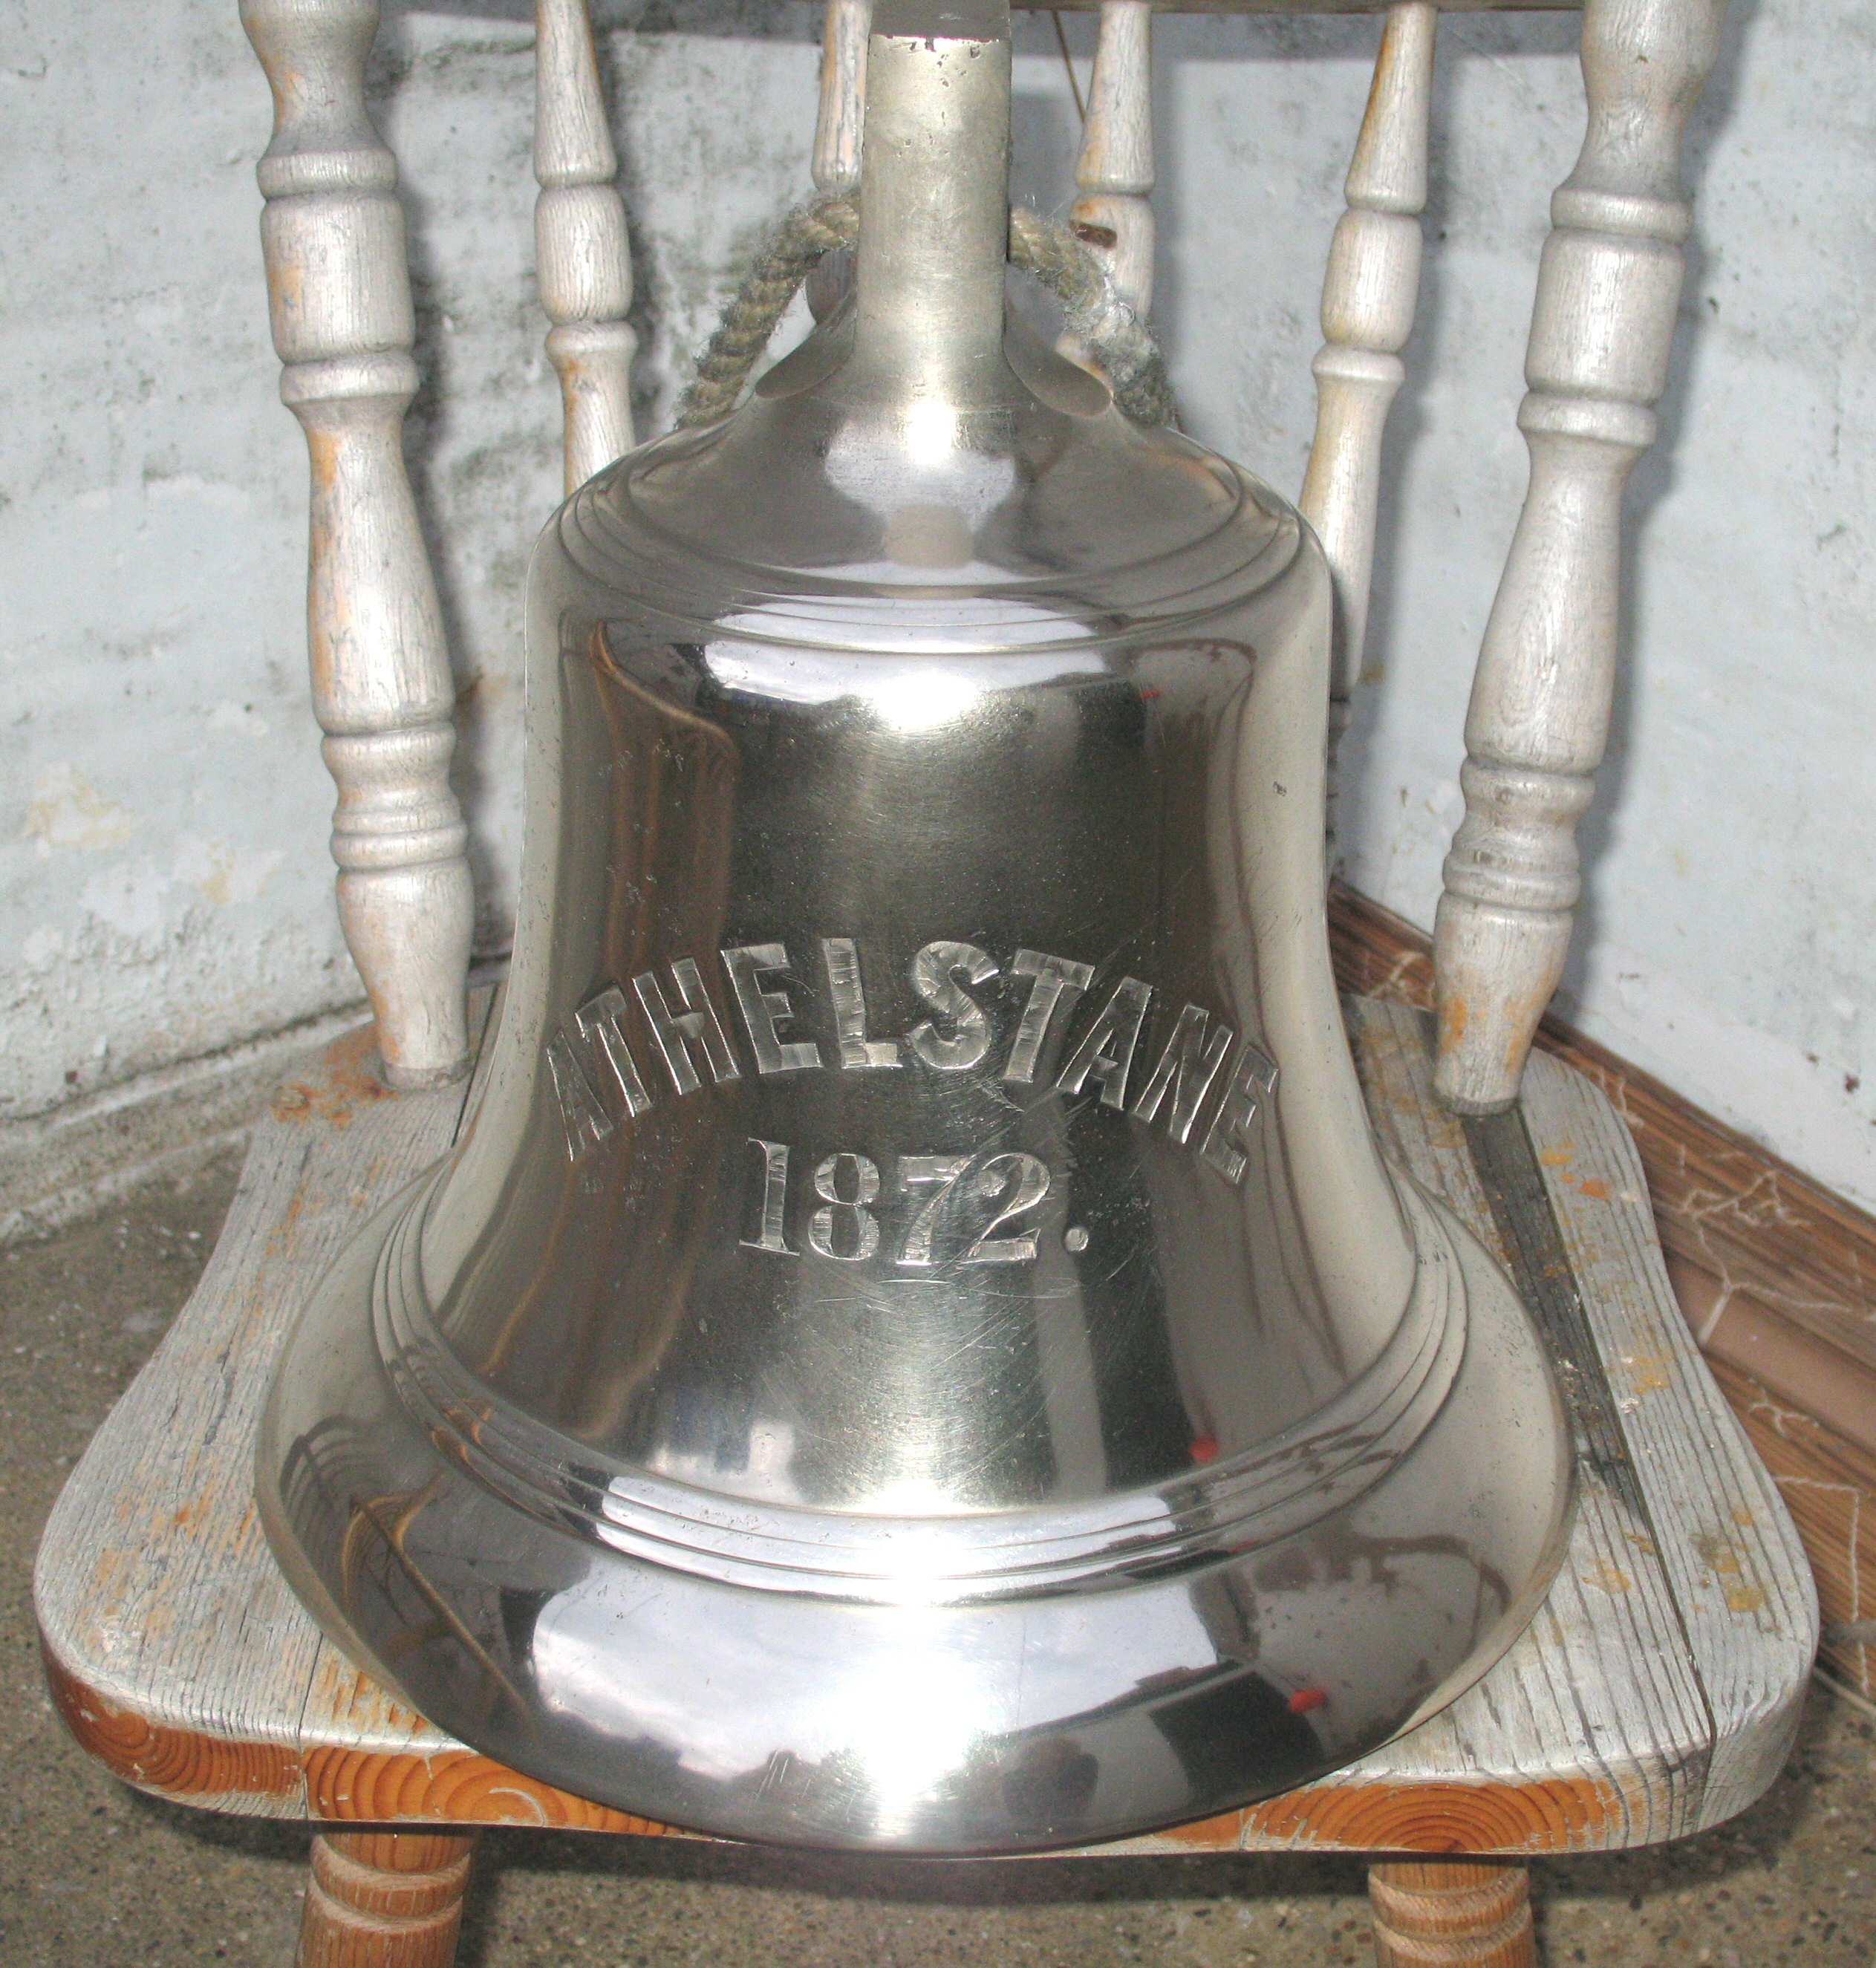 The Polished Bell